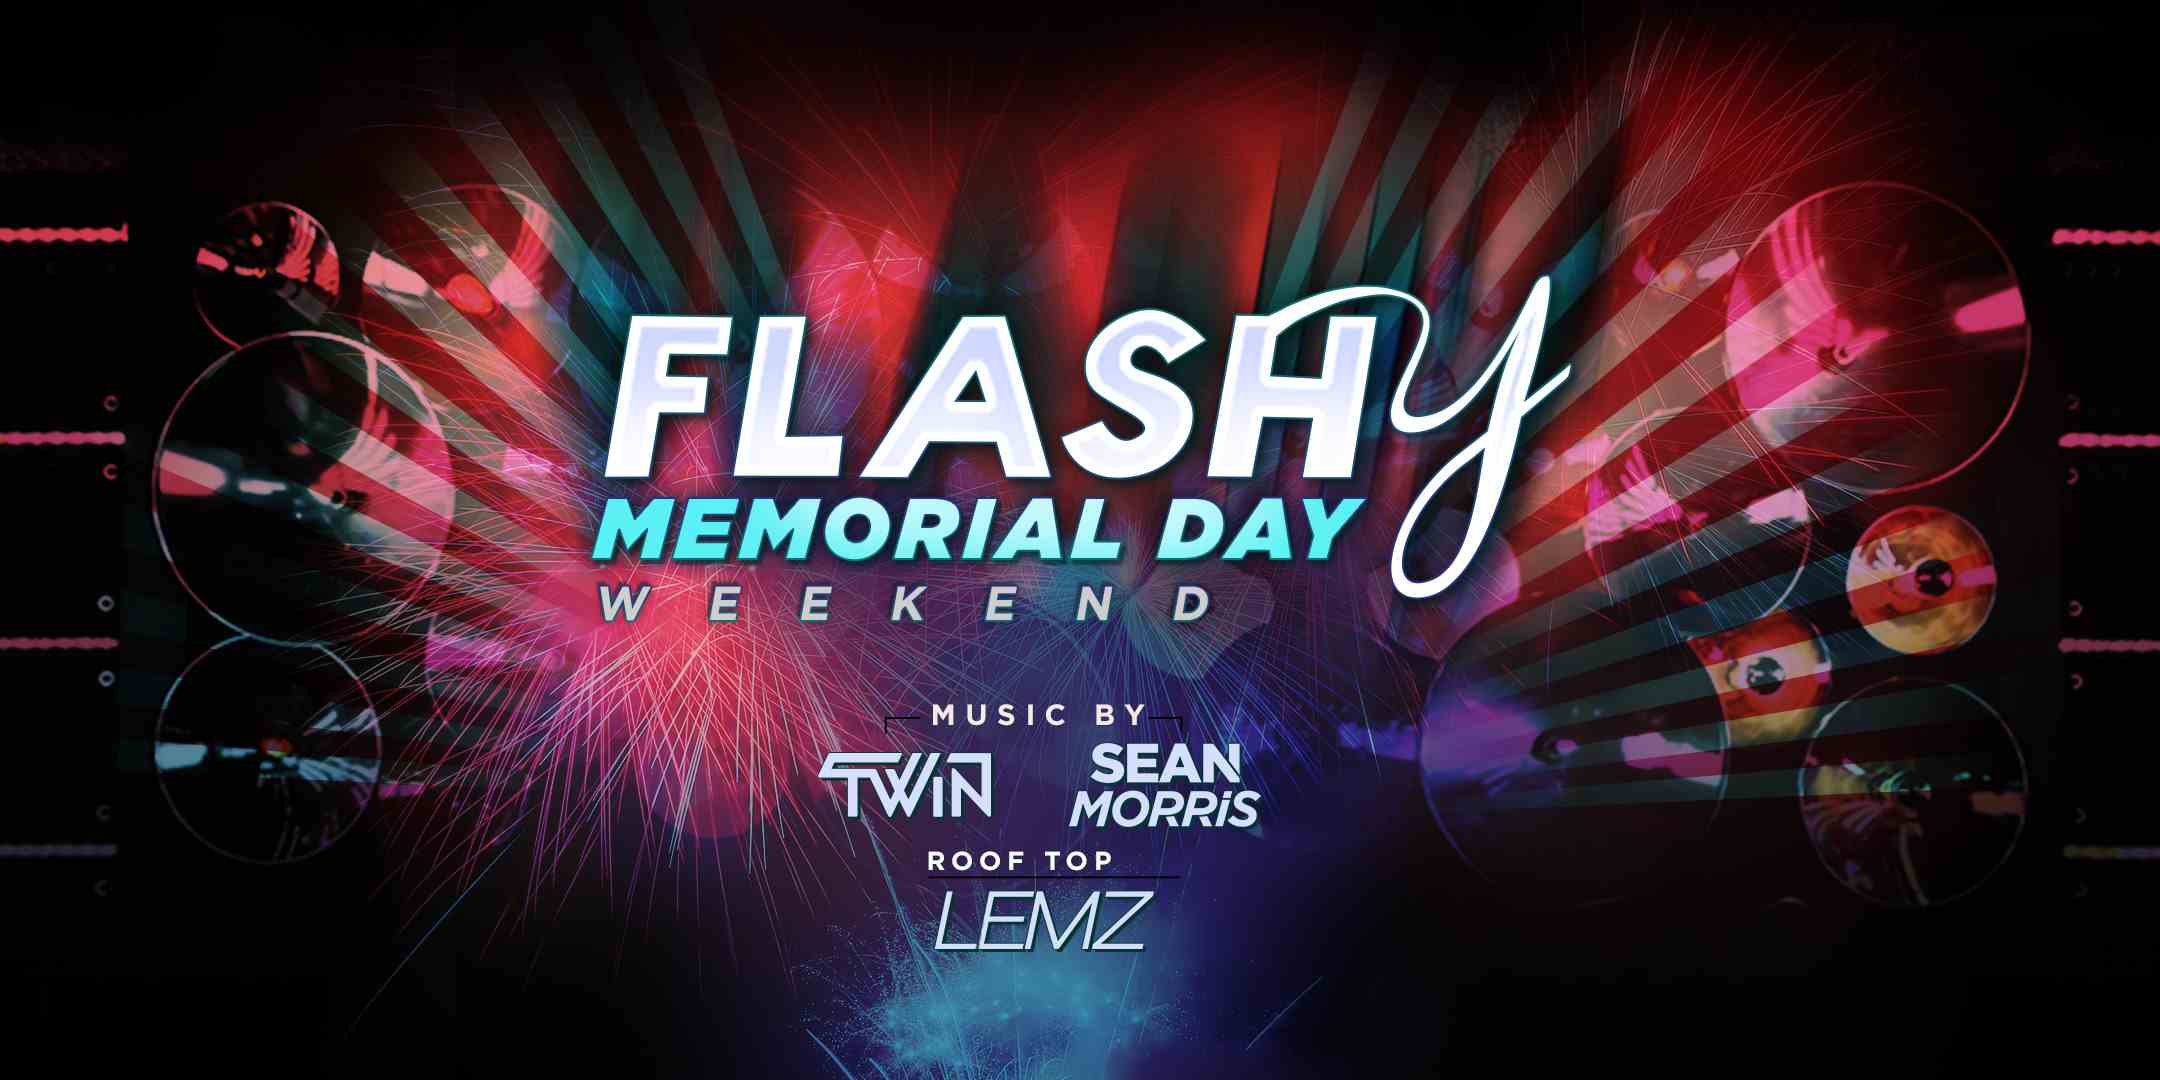 Flashy Memorial Day event thumbnail